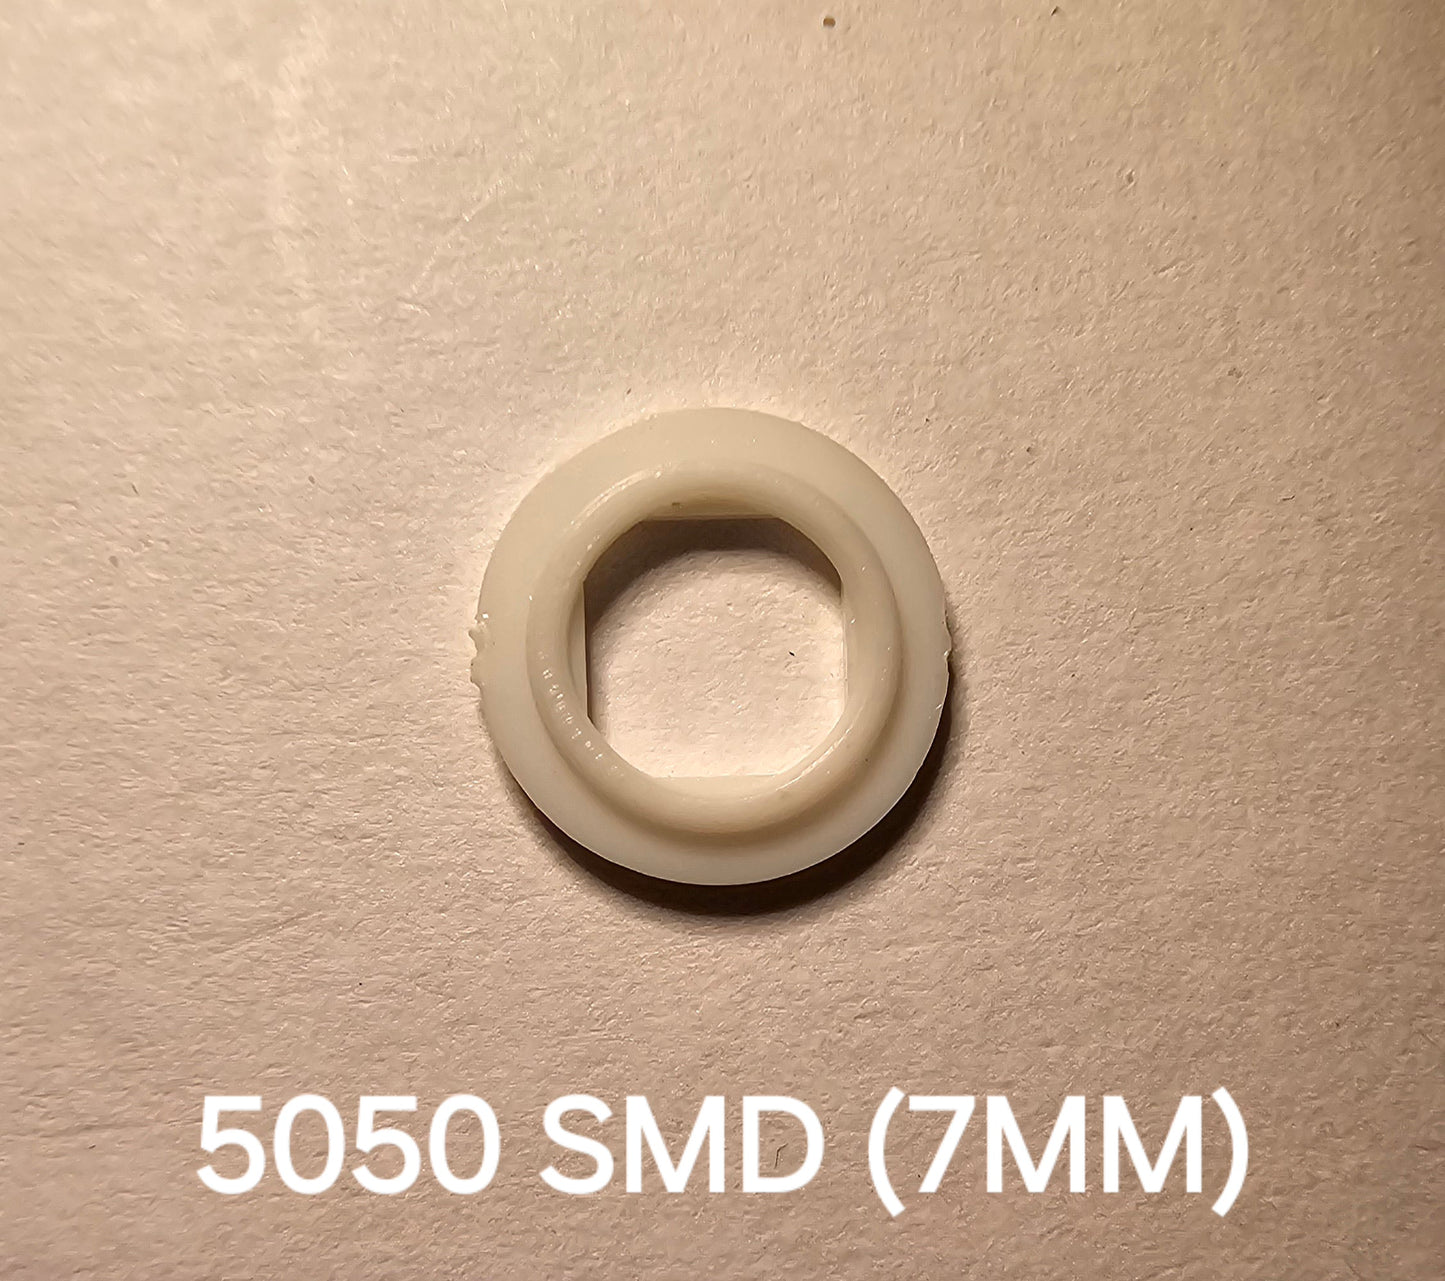 LED NYLON GASKETS 5050SMD 7MM LED OPENING (COUNTER SINK 1)